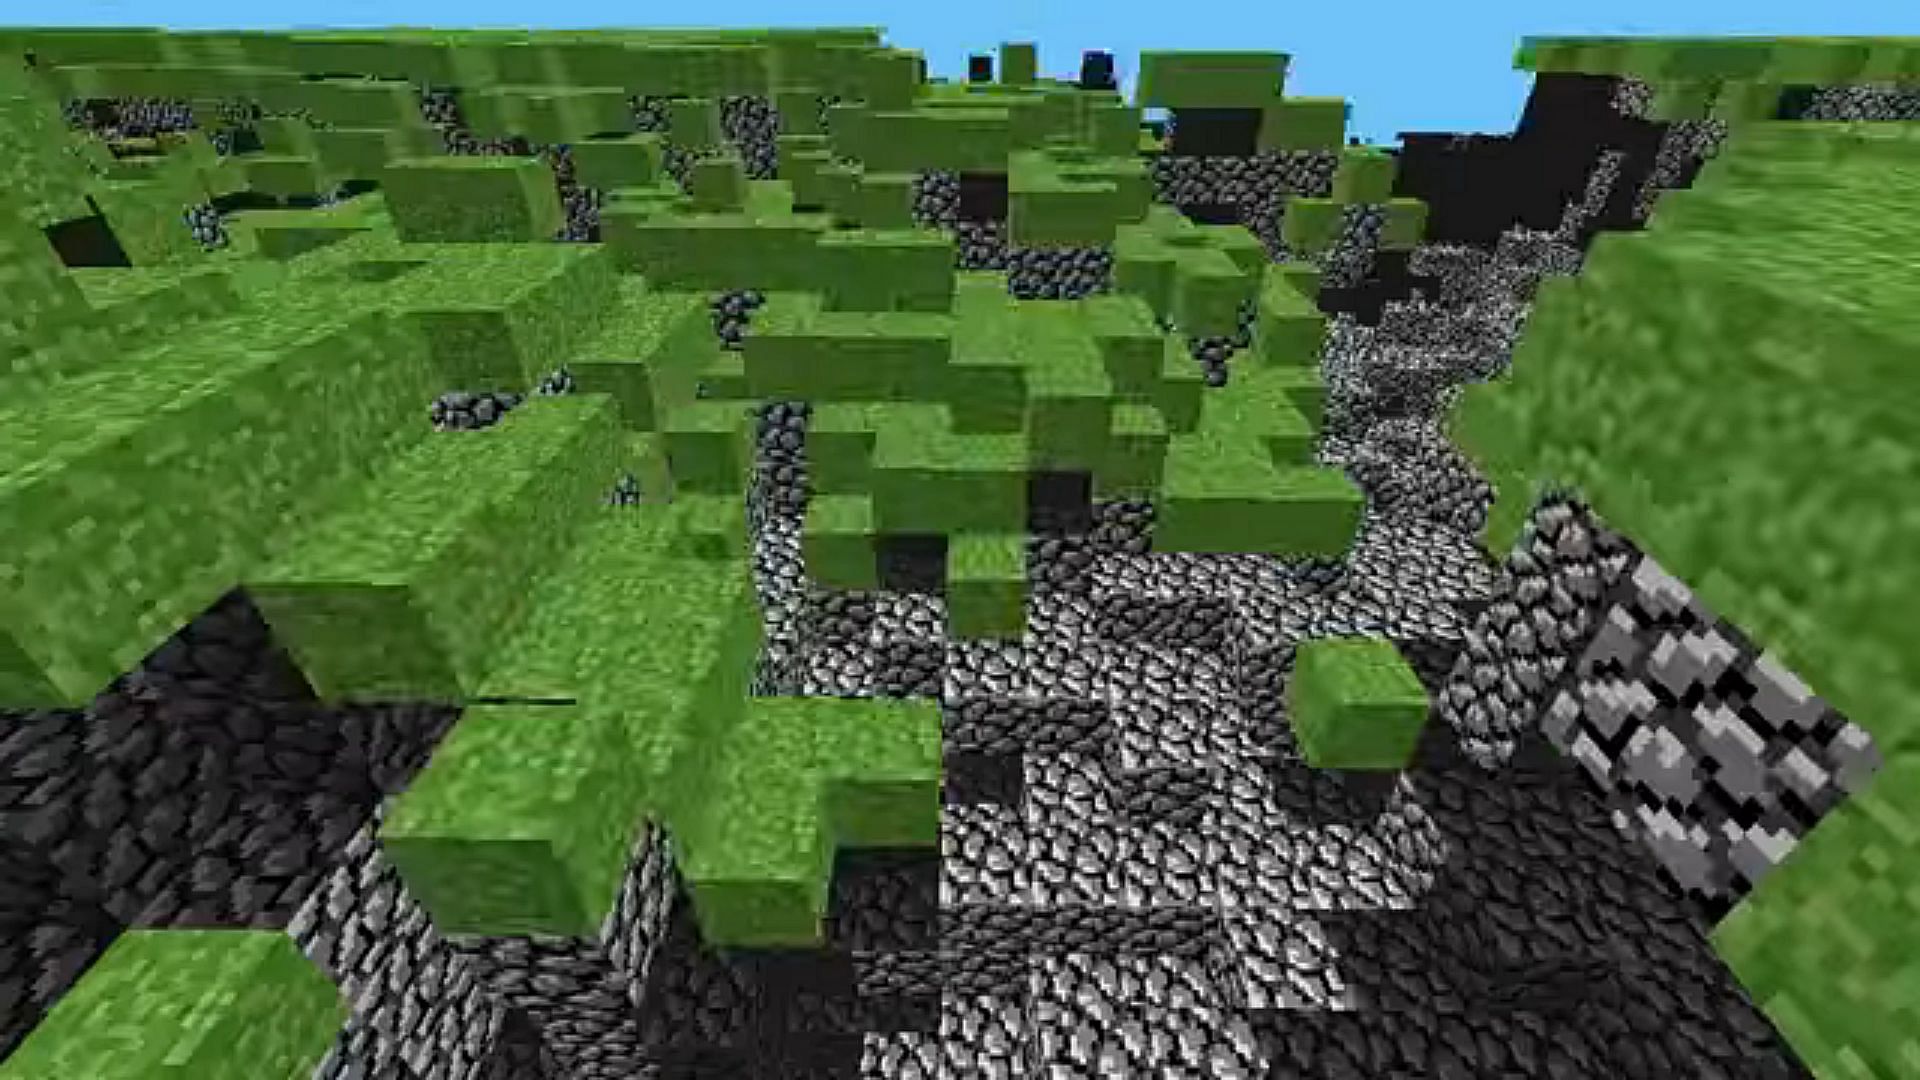 Minecraft&#039;s first version was back in May of 2009 when it was only called &#039;Cave Game&#039; (Image via Notch)